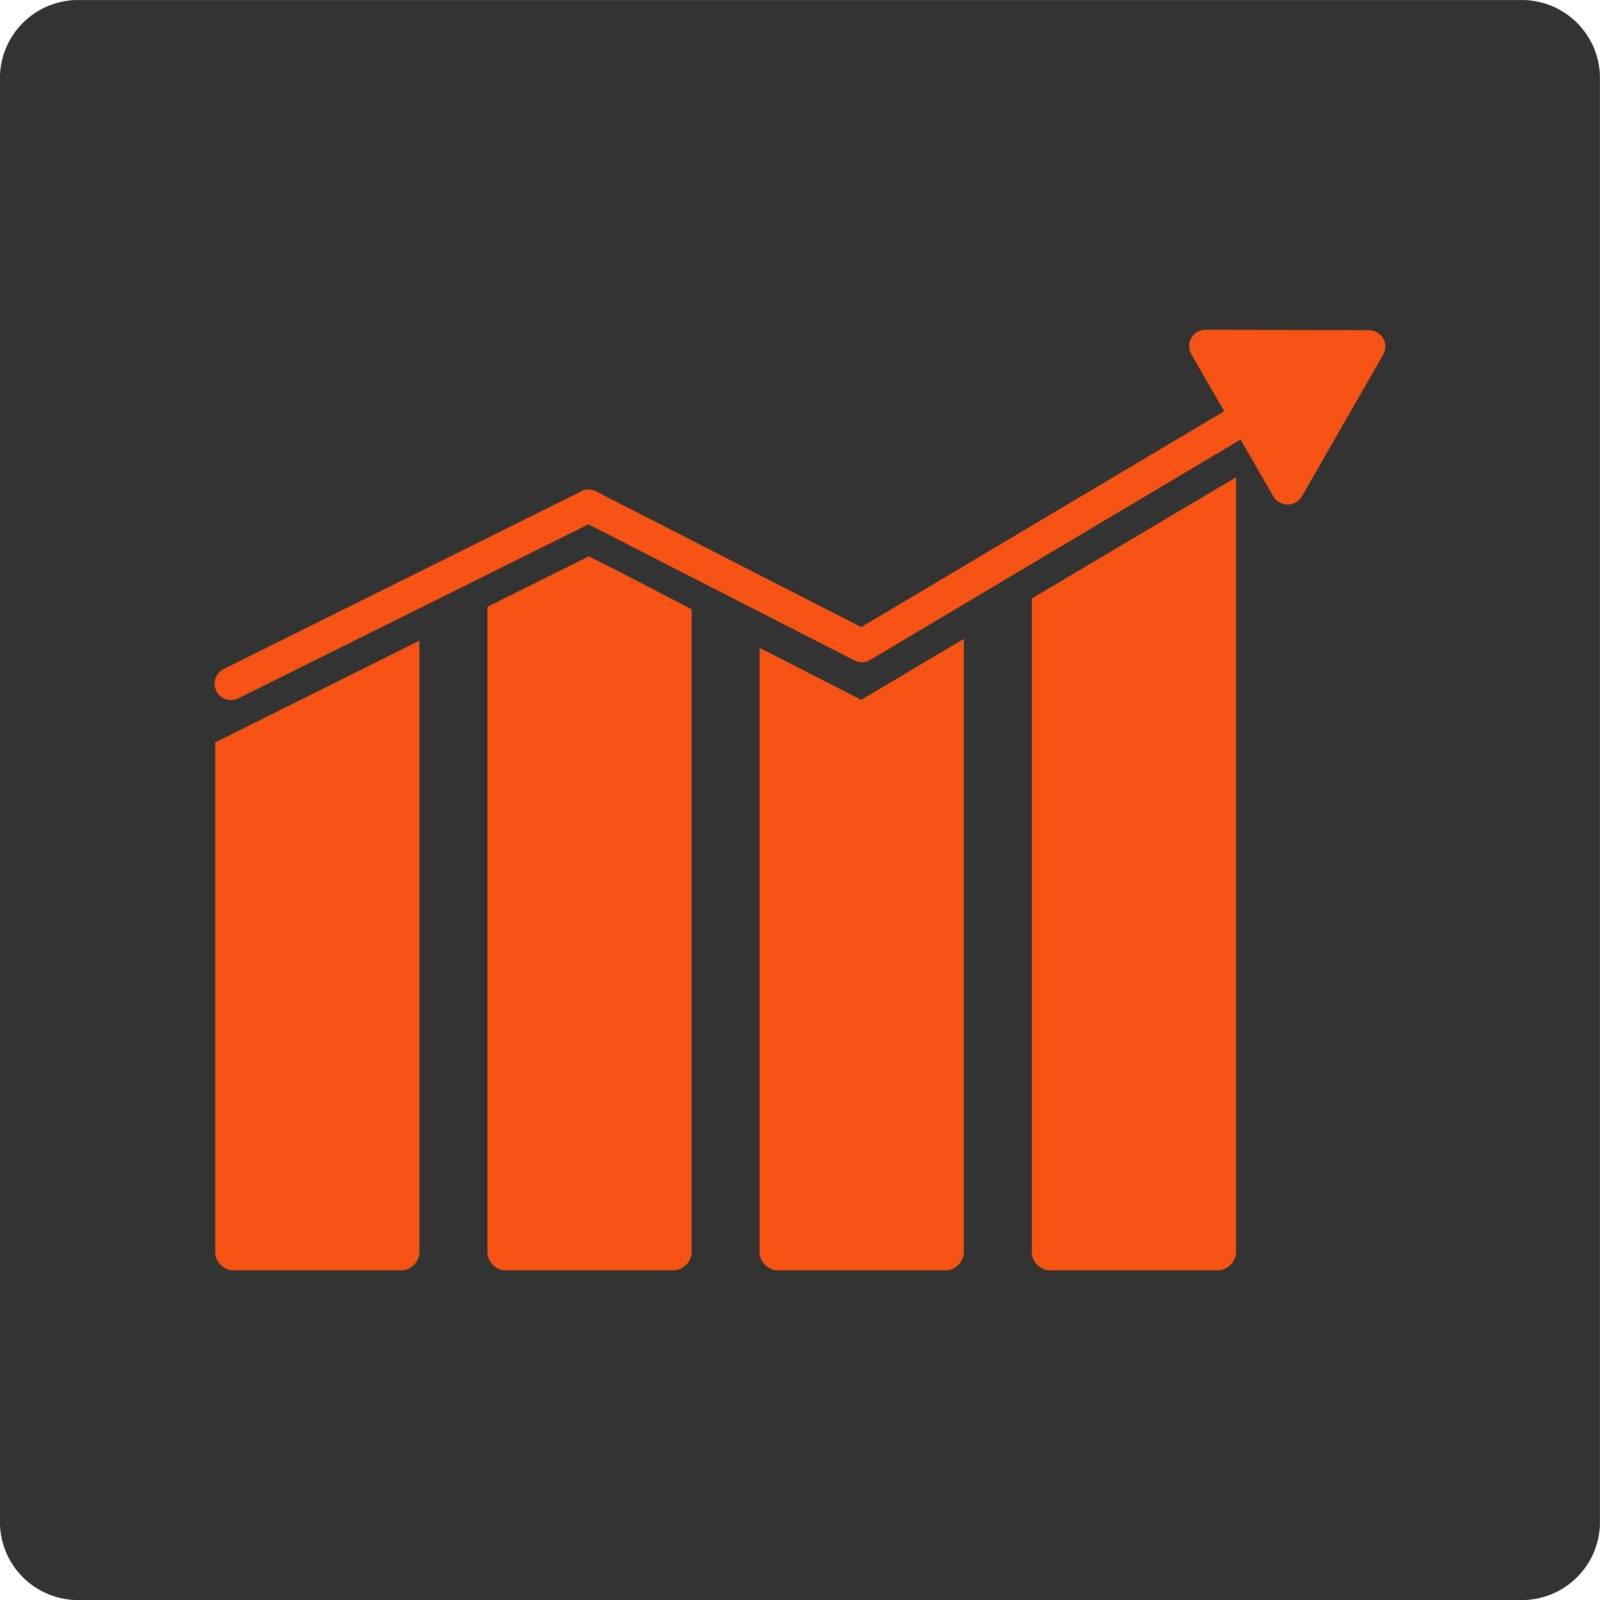 Trend vector icon. This flat rounded square button uses orange and gray colors and isolated on a white background.